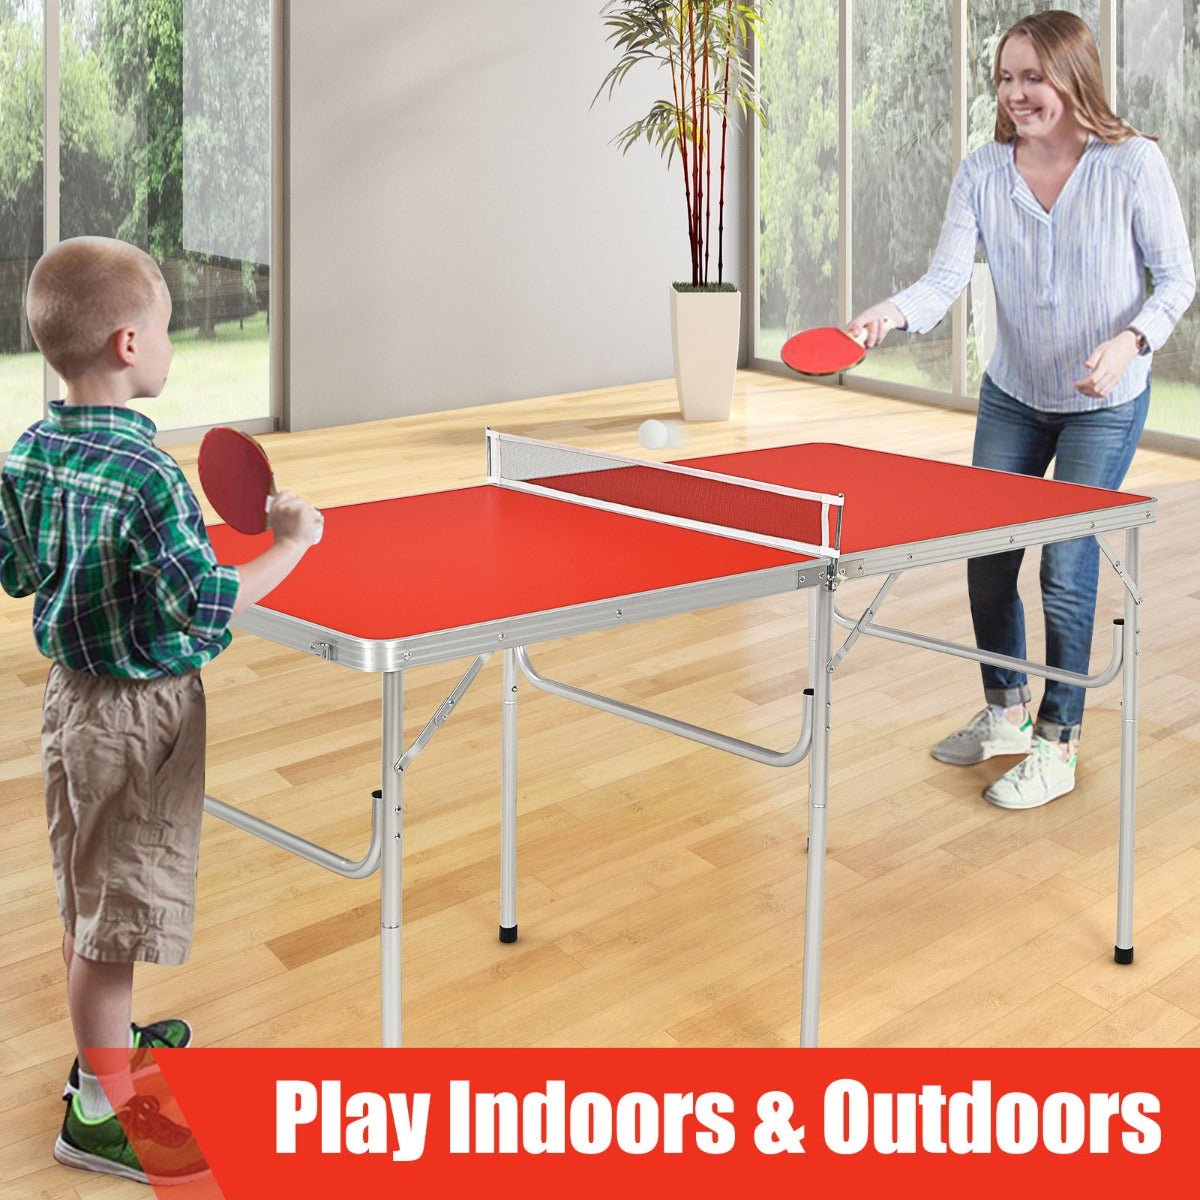 Red Foldable Table Tennis Set: Active Fun for All Ages